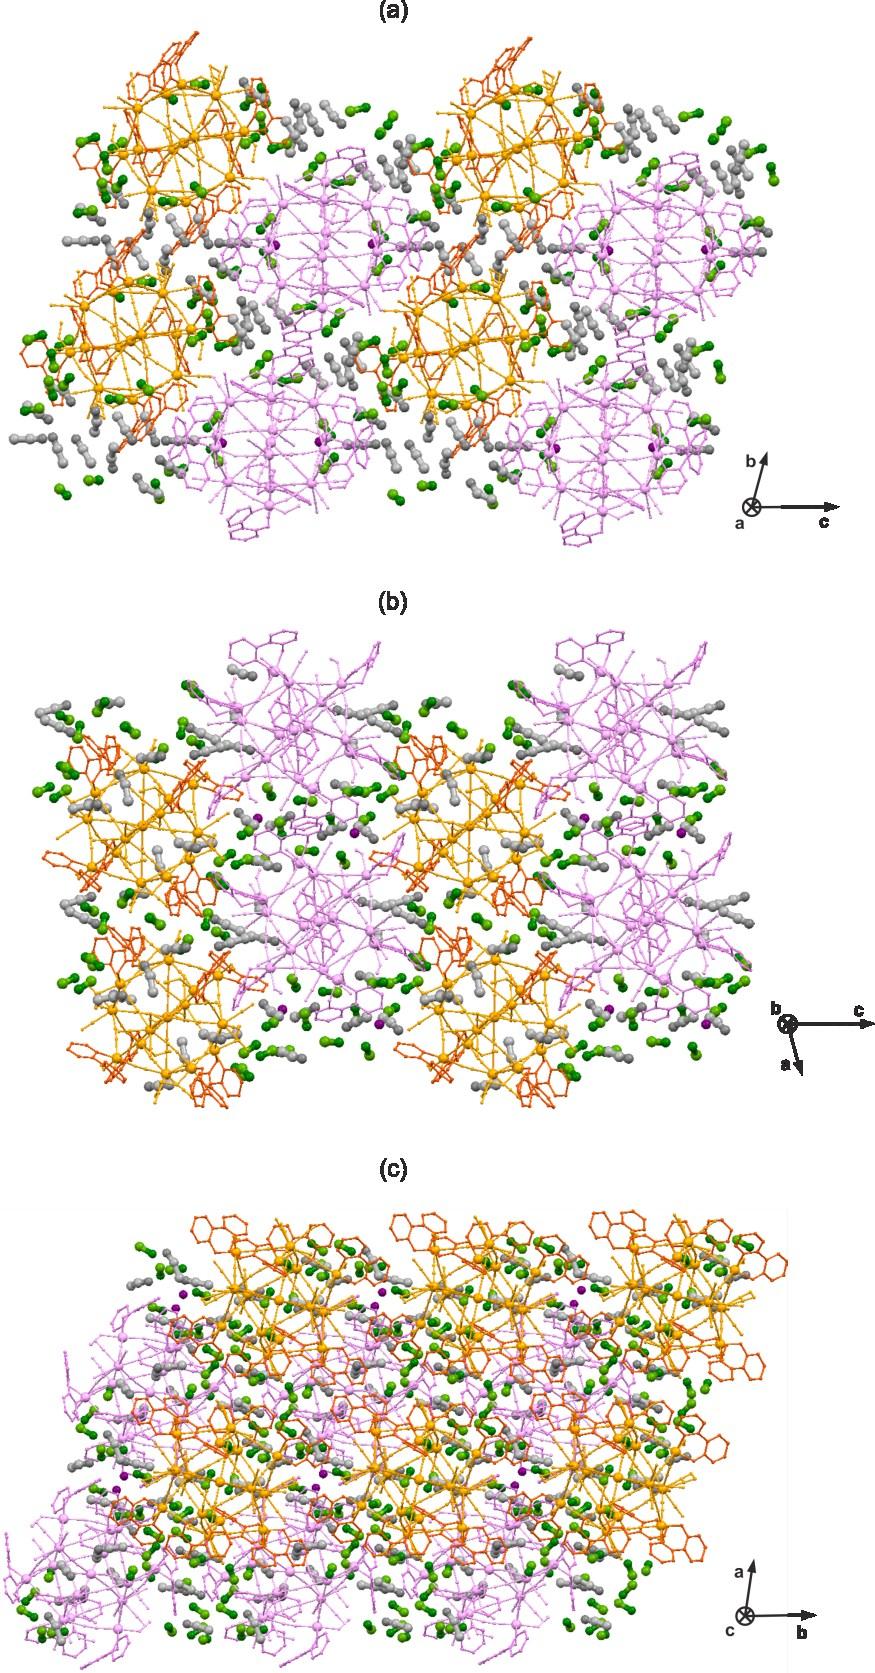 Figure S9 The supramolecular arrangement of cyanido-bridged clusters and crystallization solvent molecules of water (purple), methanol (green) and acetonitrile (grey) in the crystal structure of 2